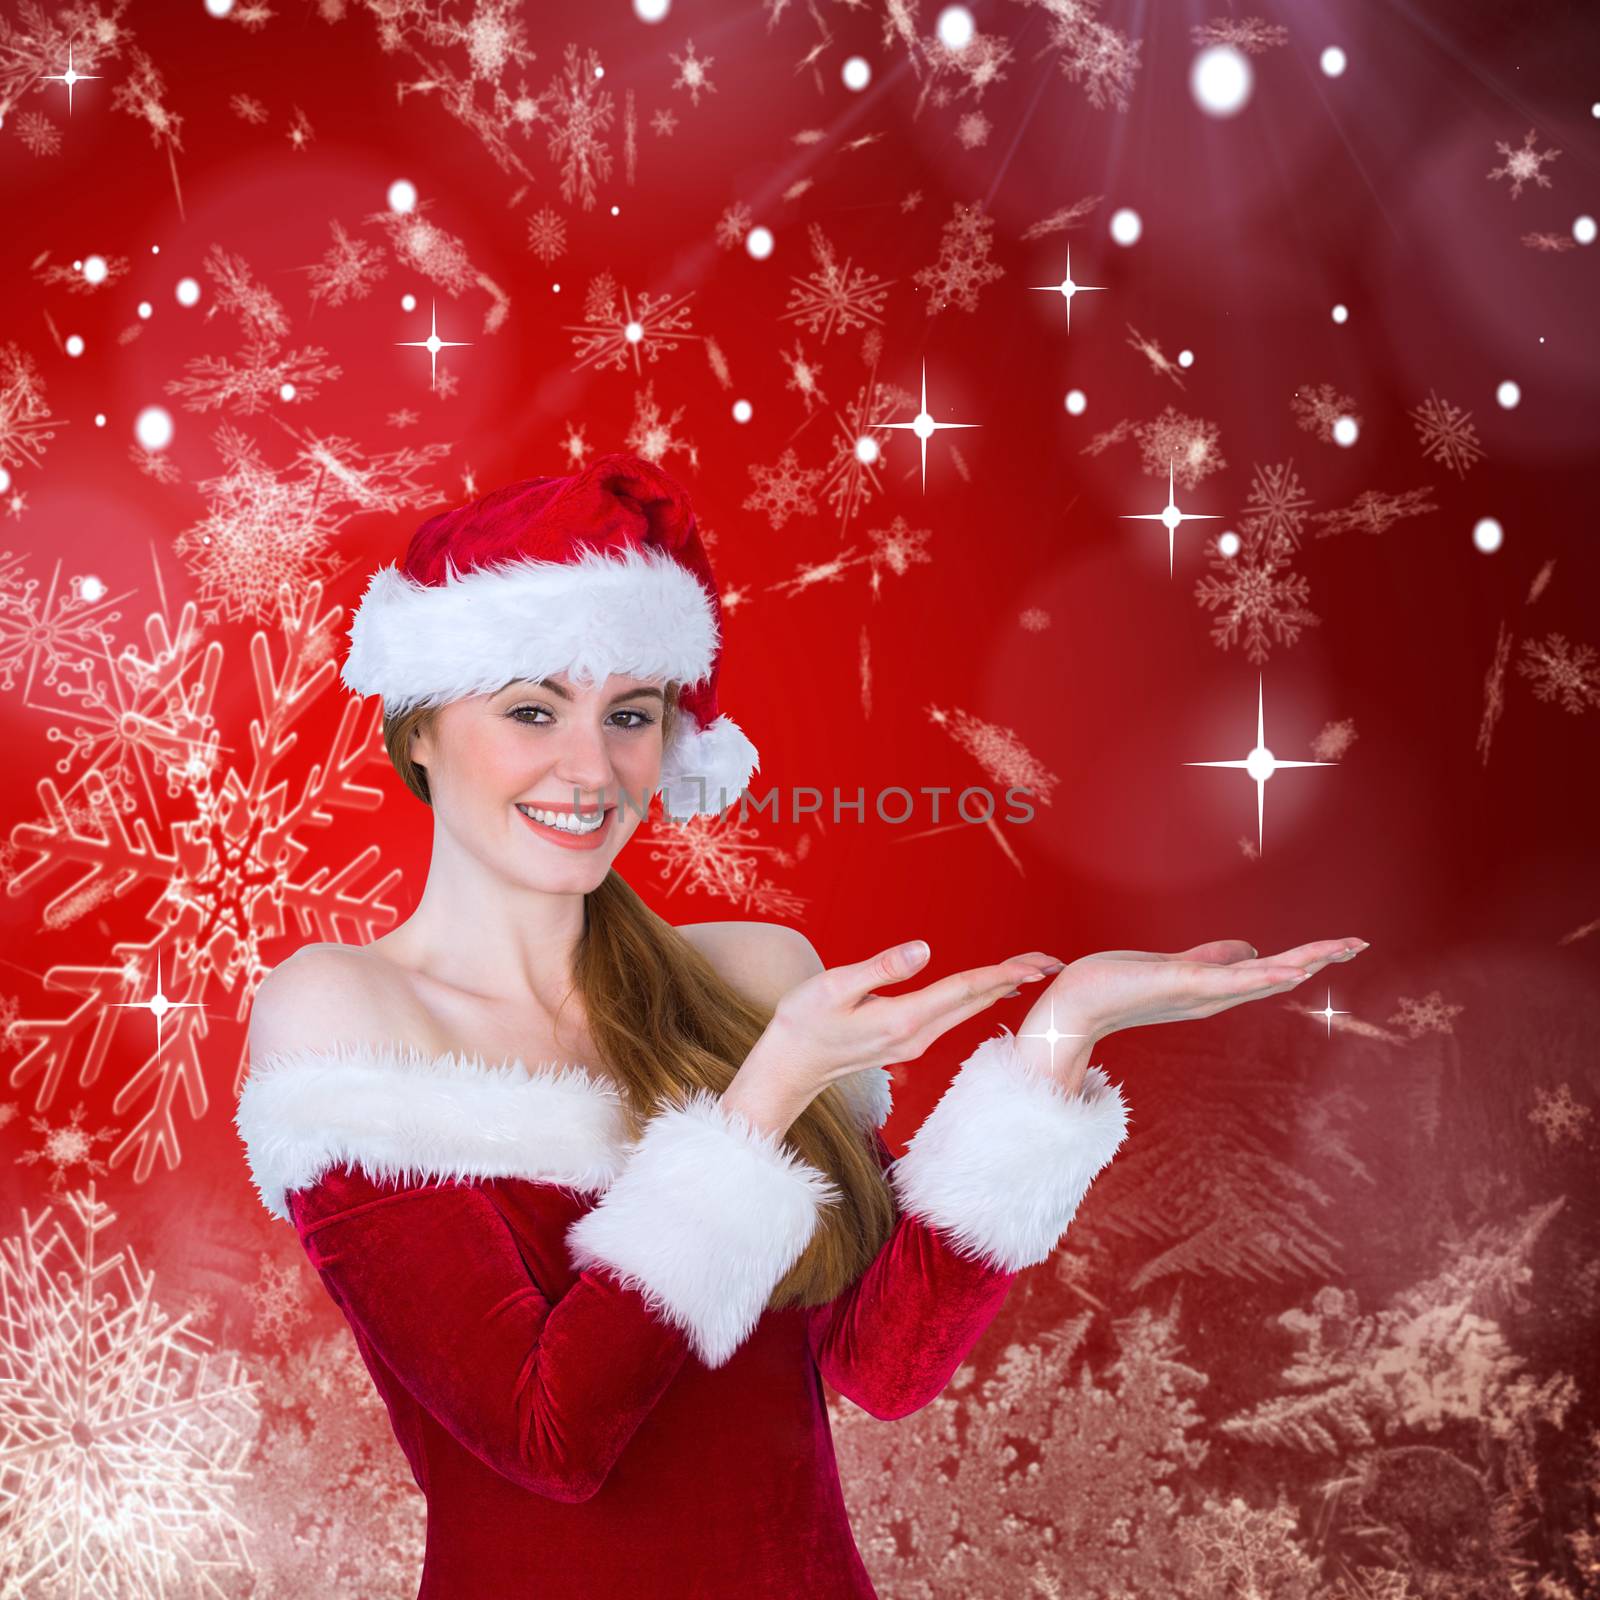 Pretty girl in santa costume holding hand out against red snow flake pattern design